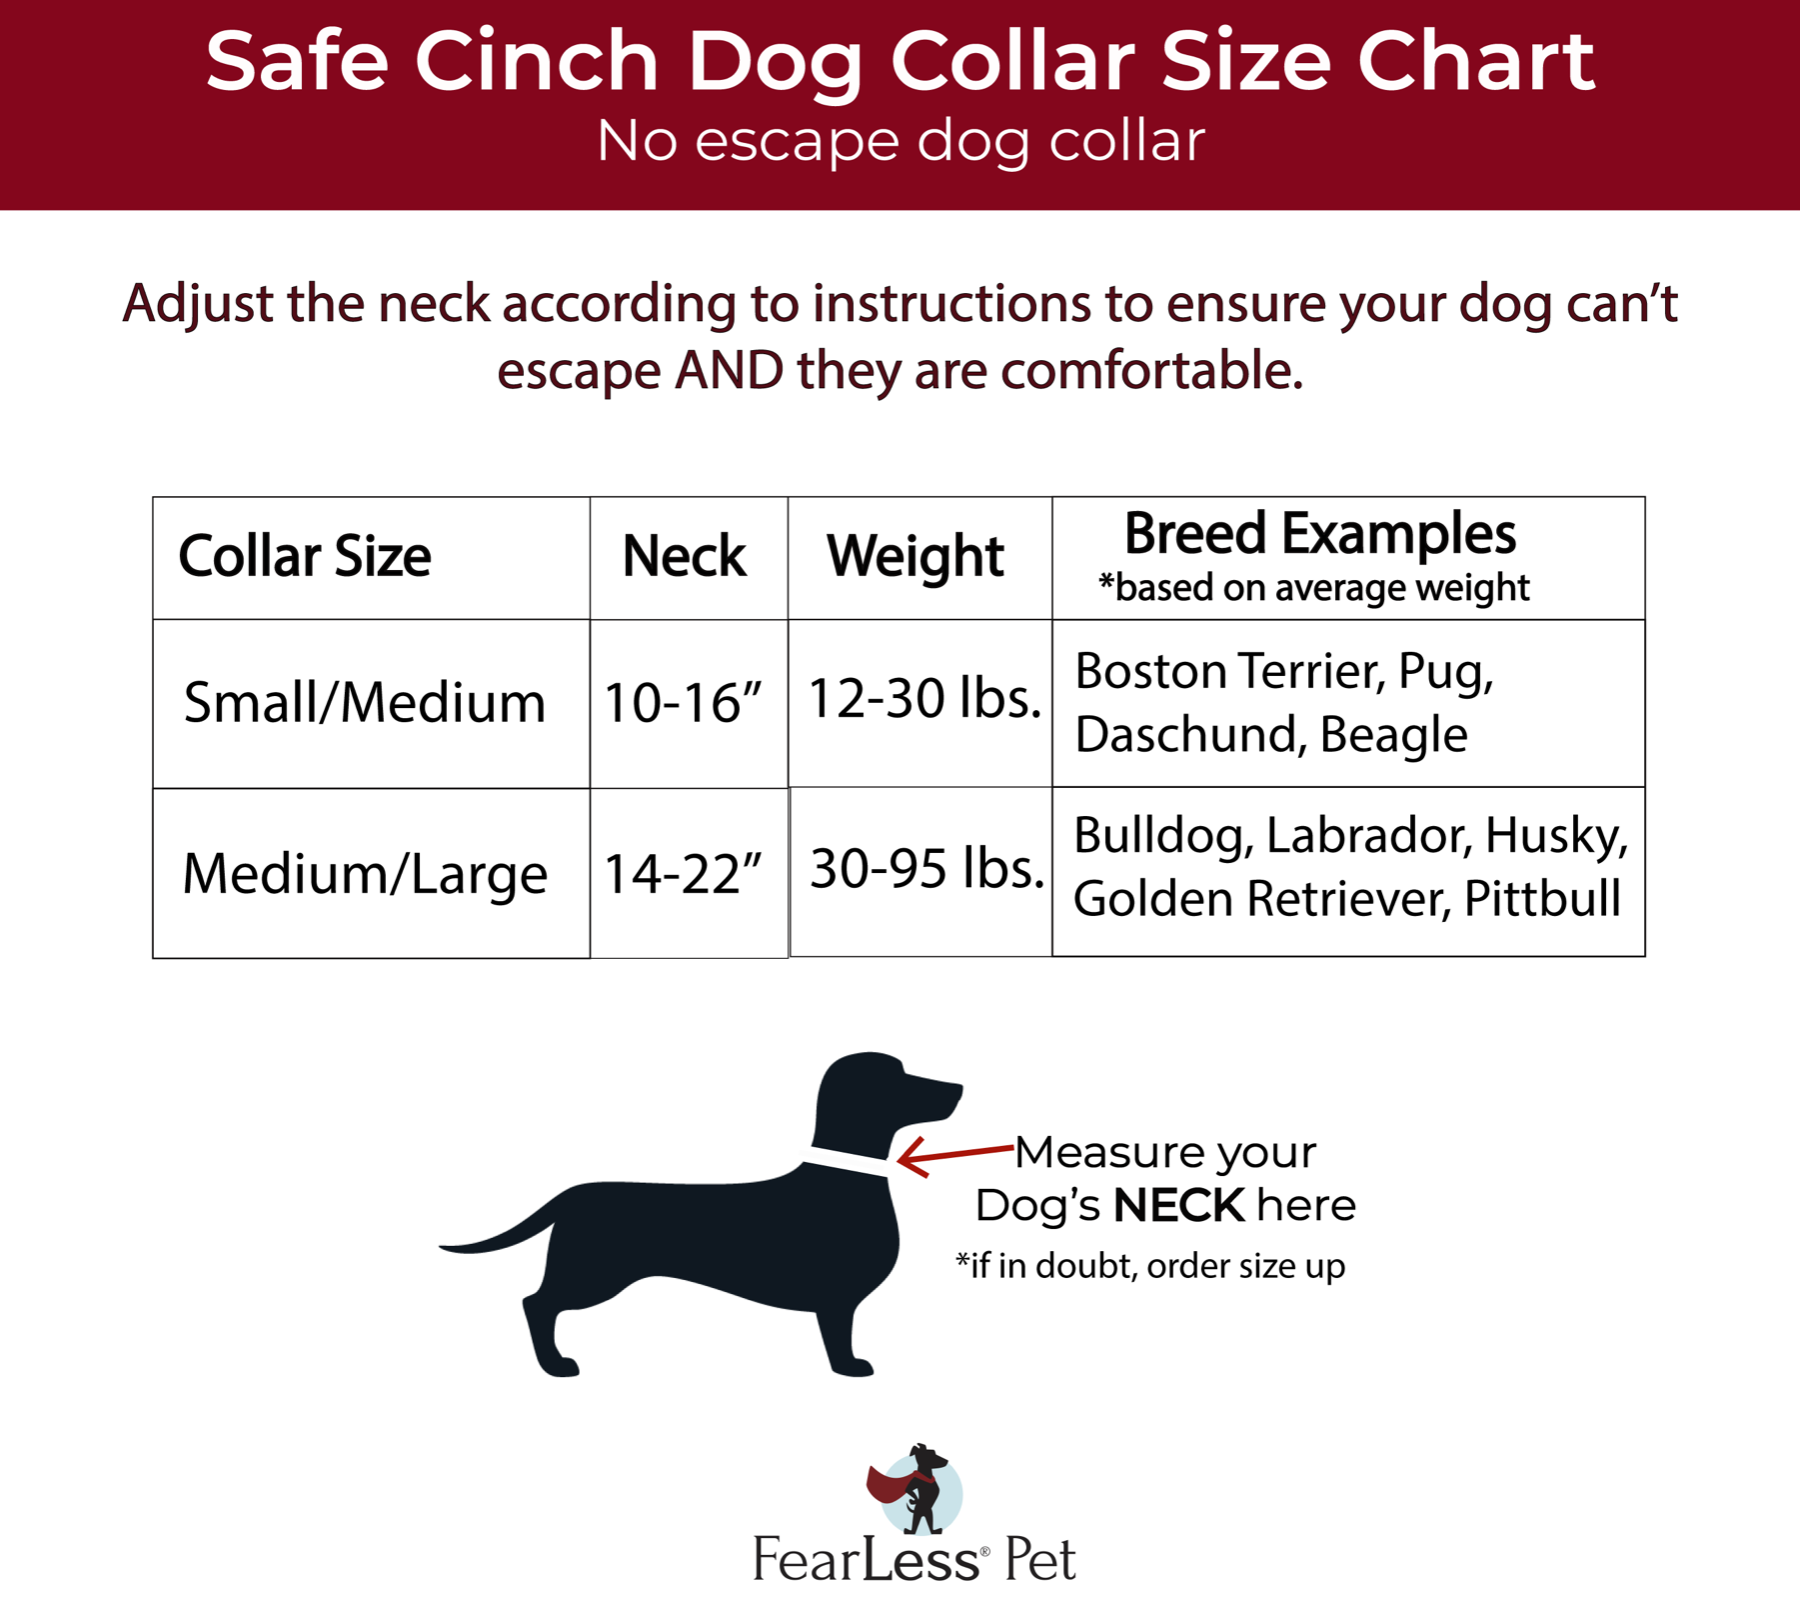 a size chart for a no escape dog collar from fearless pet indicating sized from 12 to 95 lb dogs